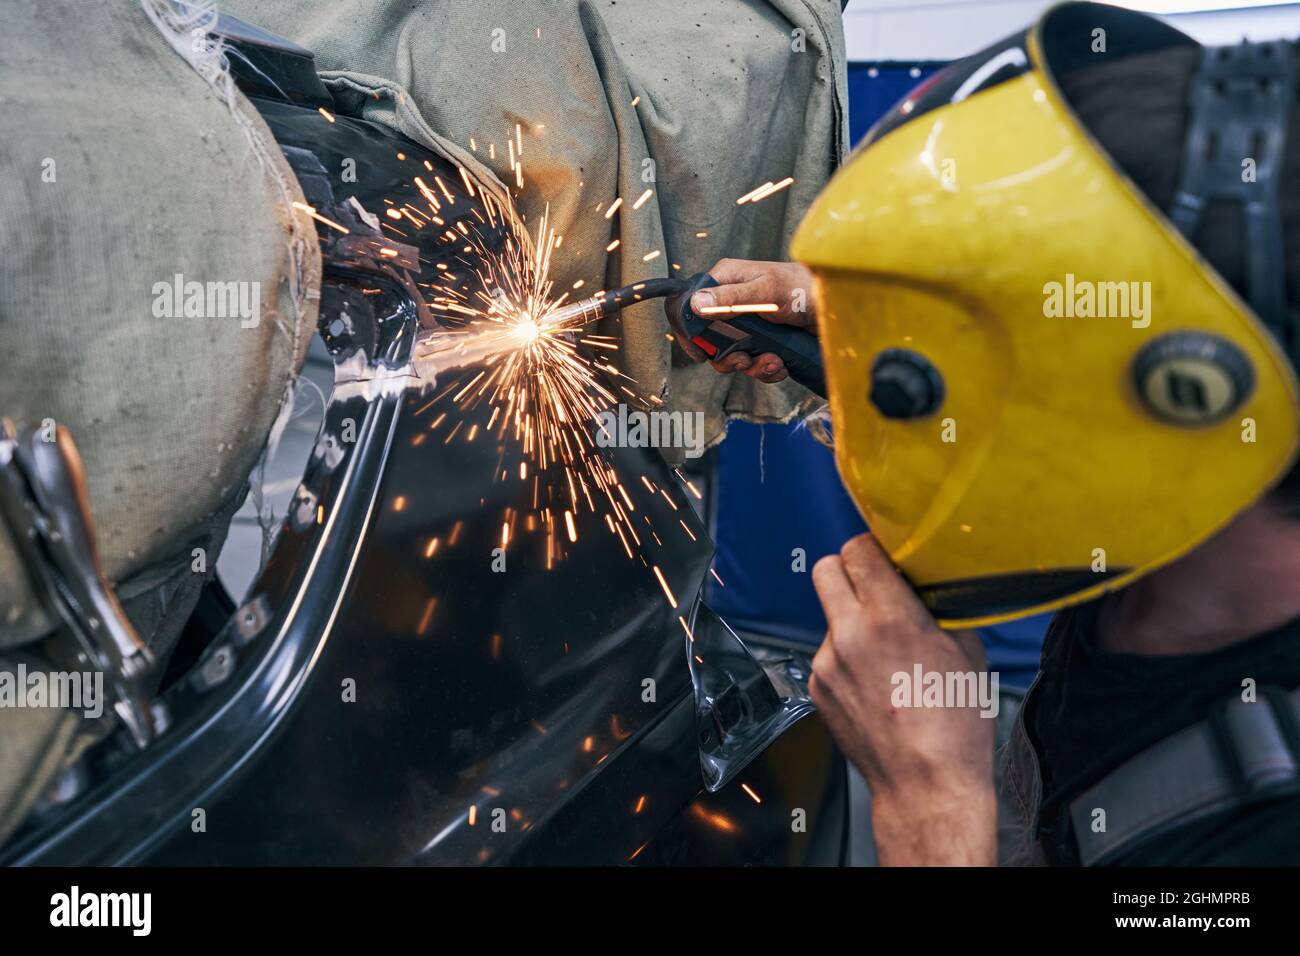 Welder using machine for welding a joint on auto surface Stock Photo